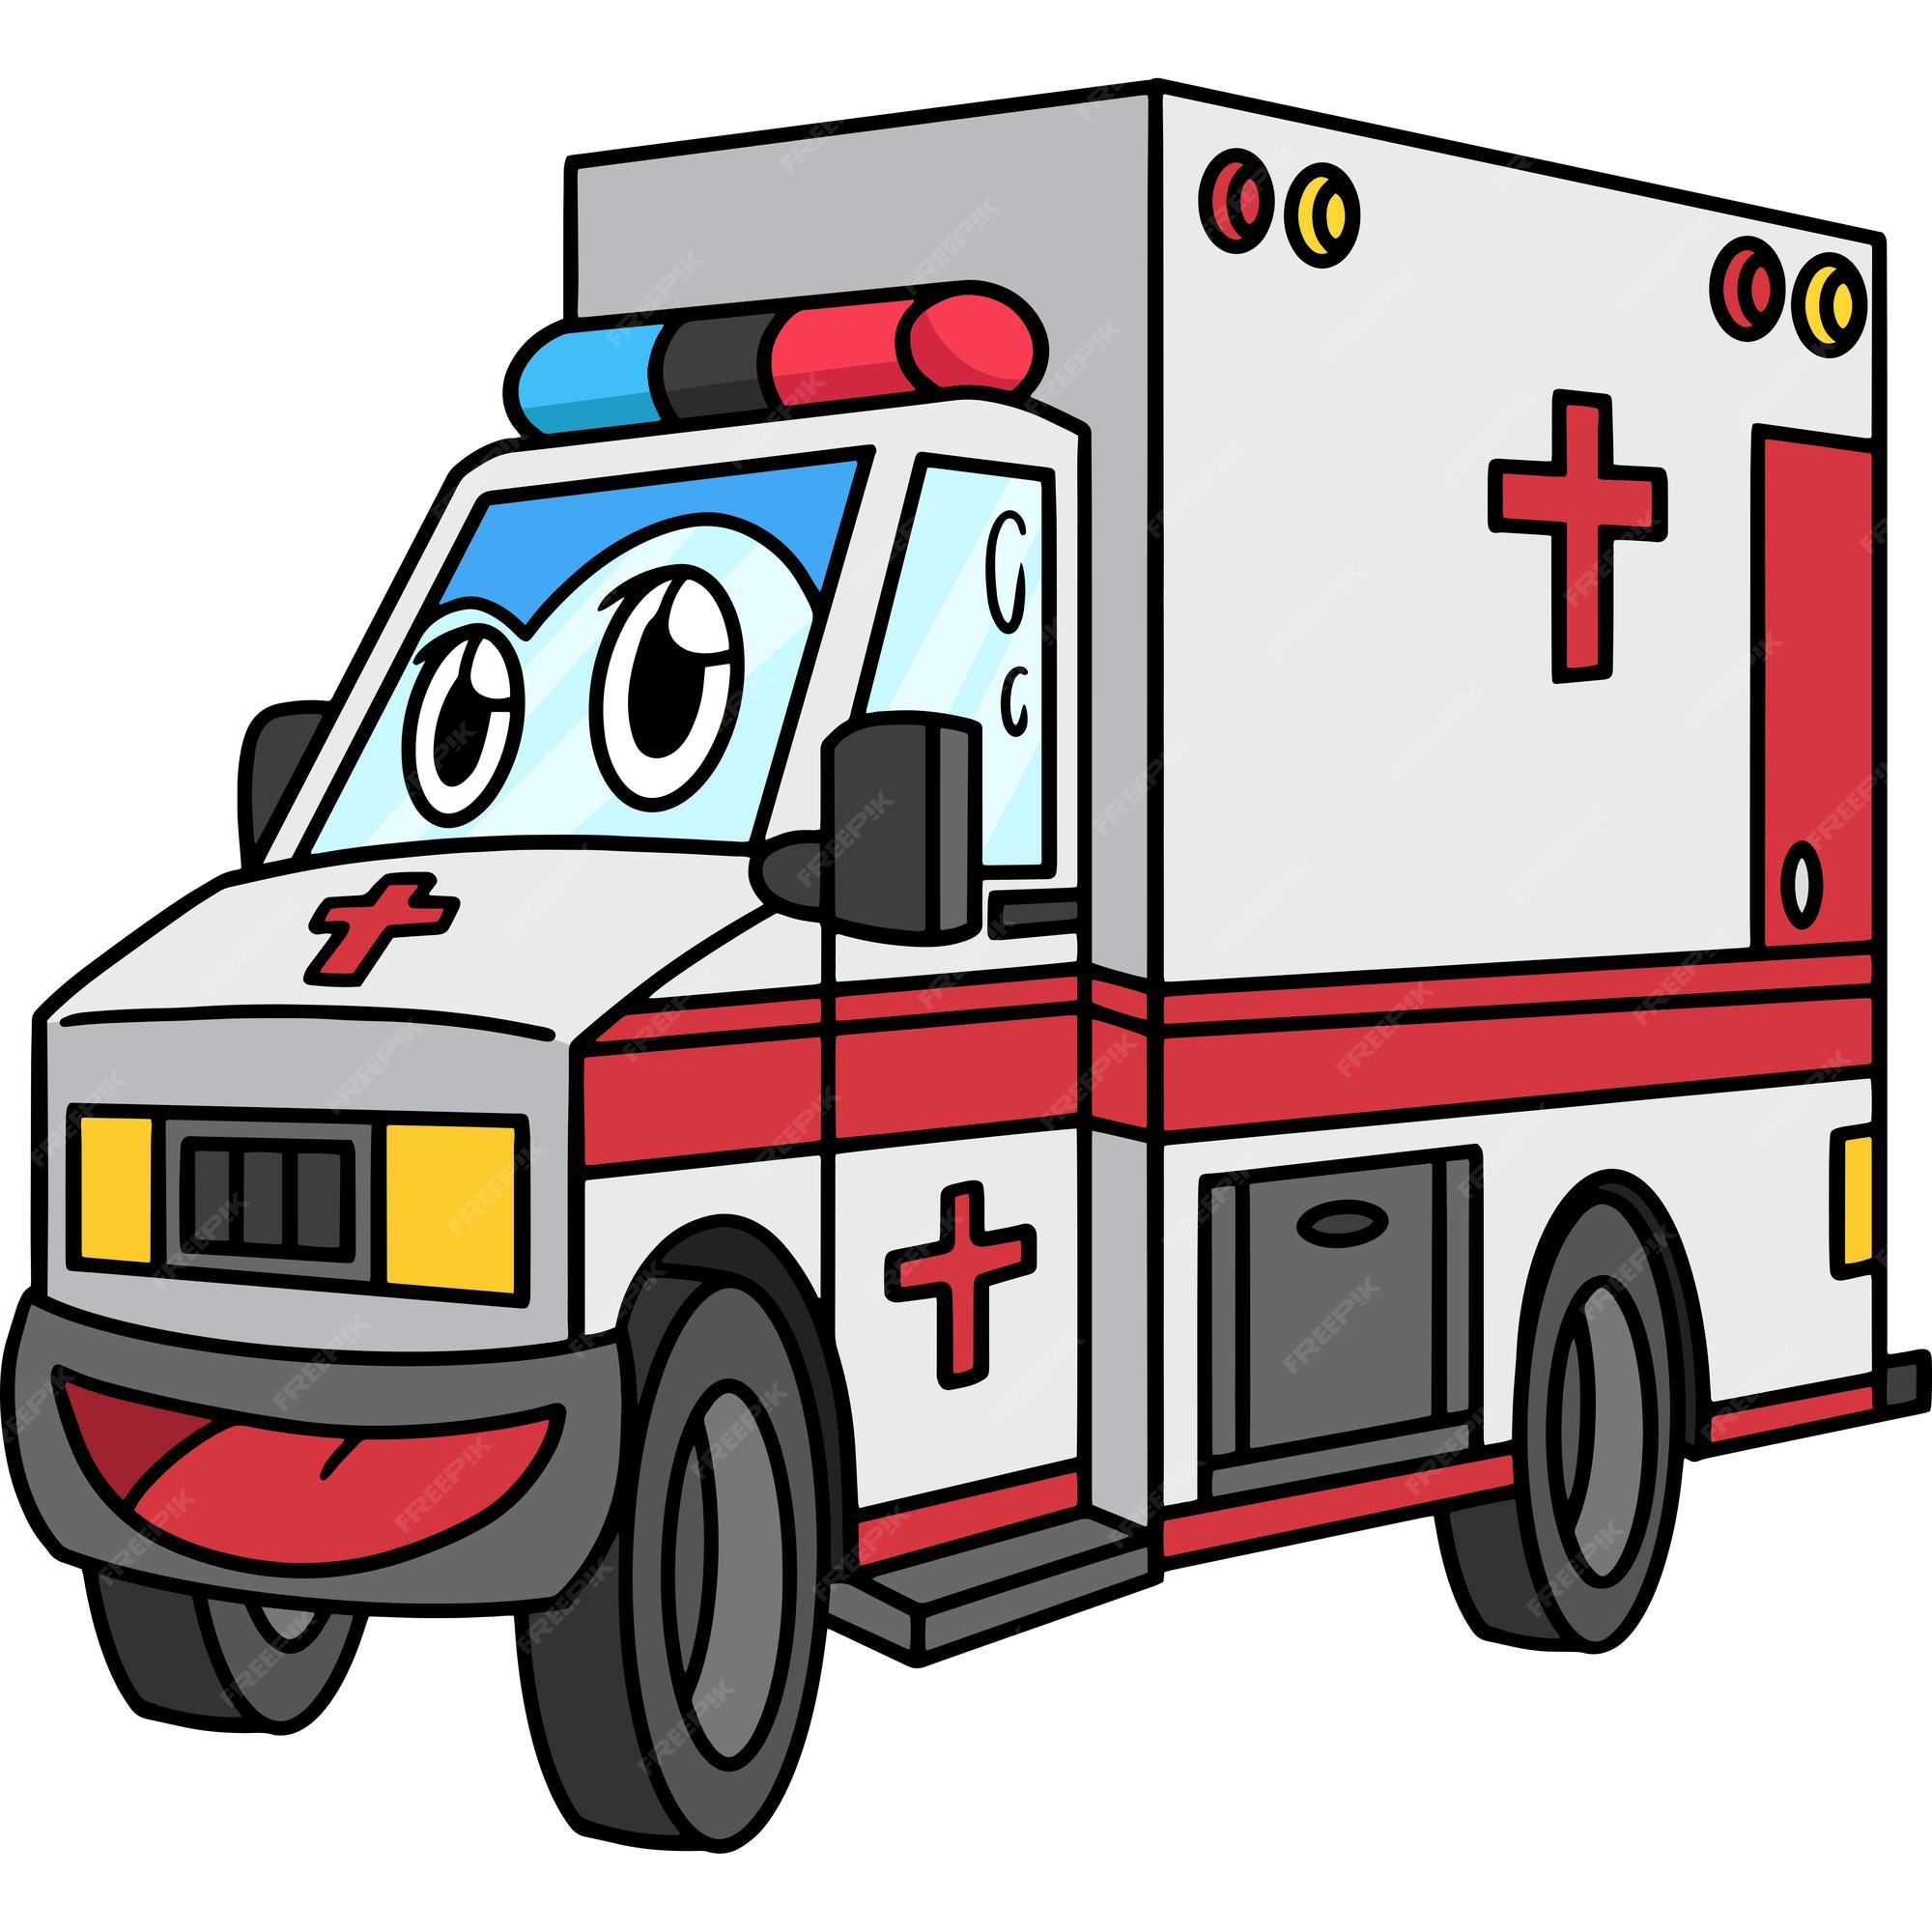 Premium Vector | Ambulance with face vehicle cartoon clipart